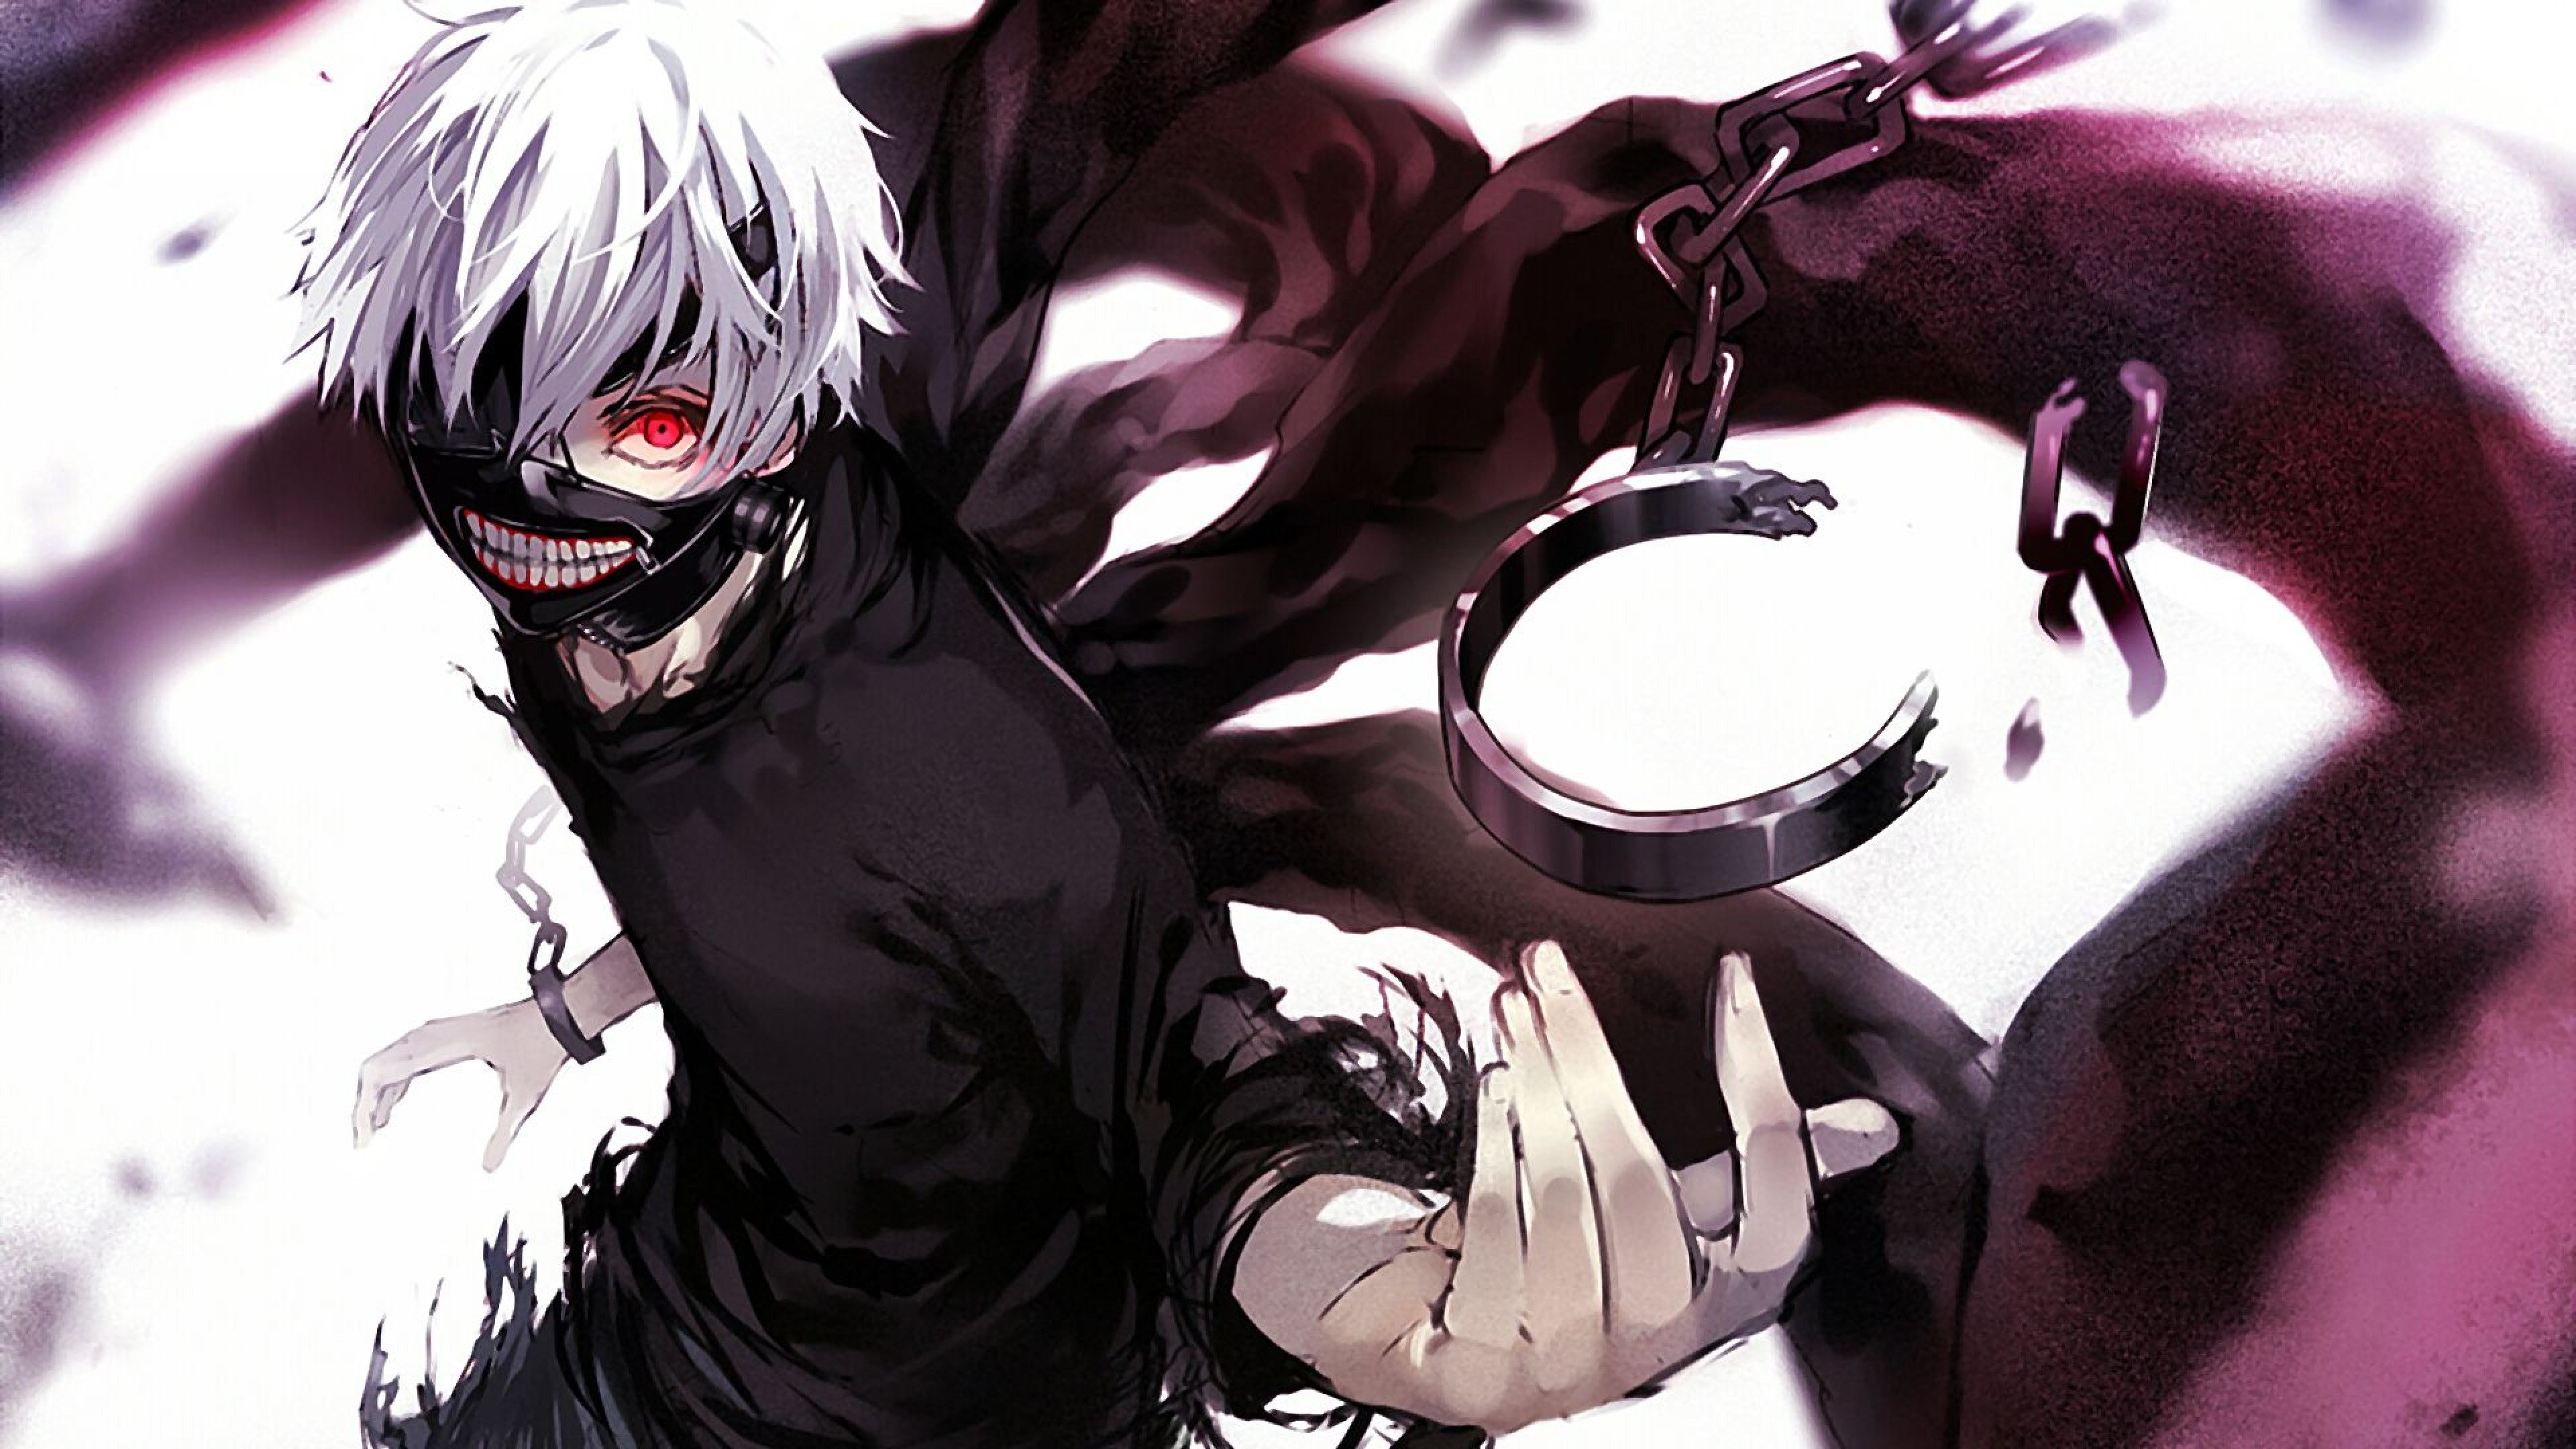 Tokyo Ghoul Anime Hd Wallpapers for Desktop and Mobiles 4K Ultra HD